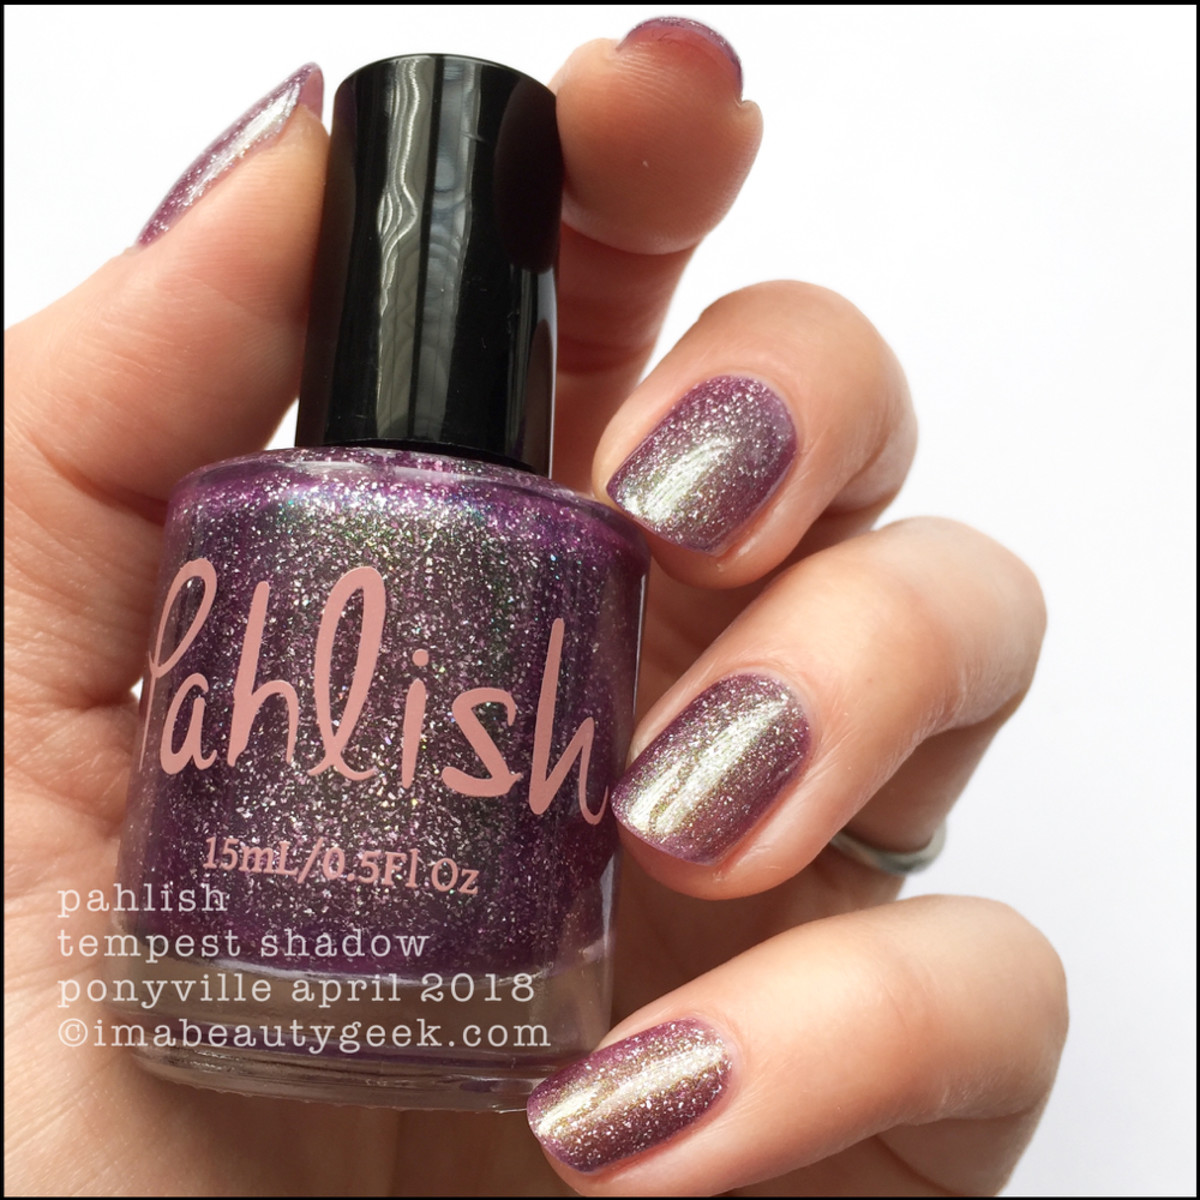 Pahlish Tempest Shadow - Pahlish Ponyville Collection April 2018